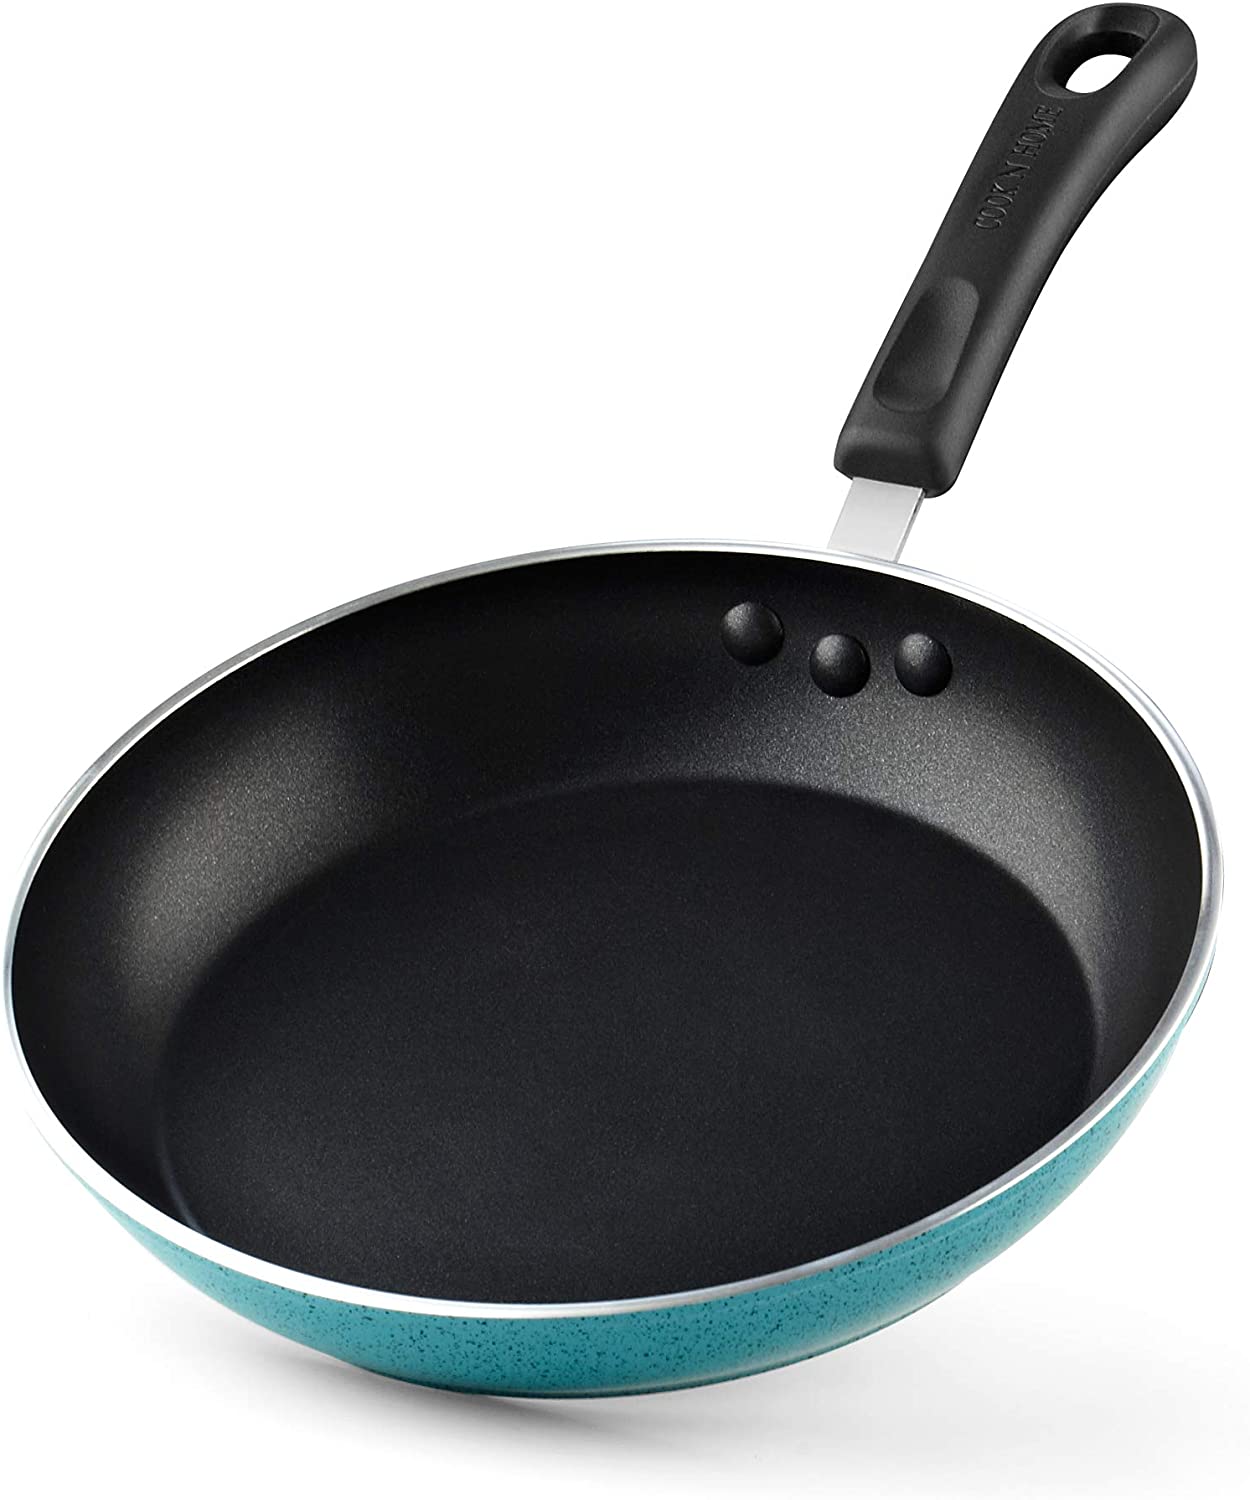 Cook N Home Basics Nonstick Saute Skillet Fry Pan 3-Piece Set, 8  inch/9.5-Inch/11-inch Non-Stick Frying Pans, Black